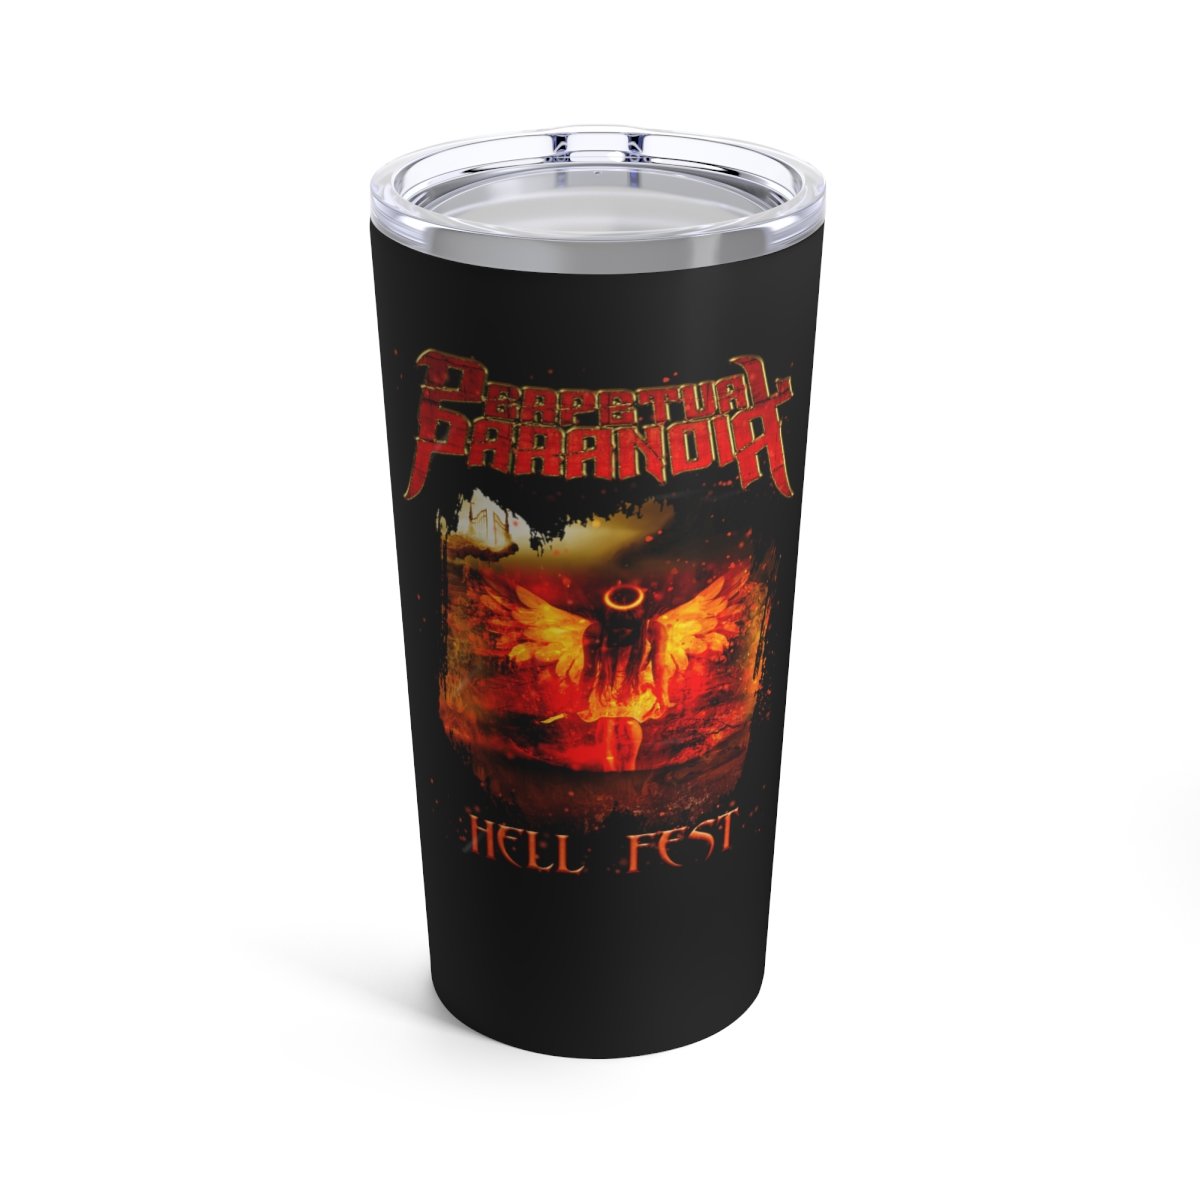 Perpetual Paranoia – Hell Fest 20oz Stainless Steel Tumbler